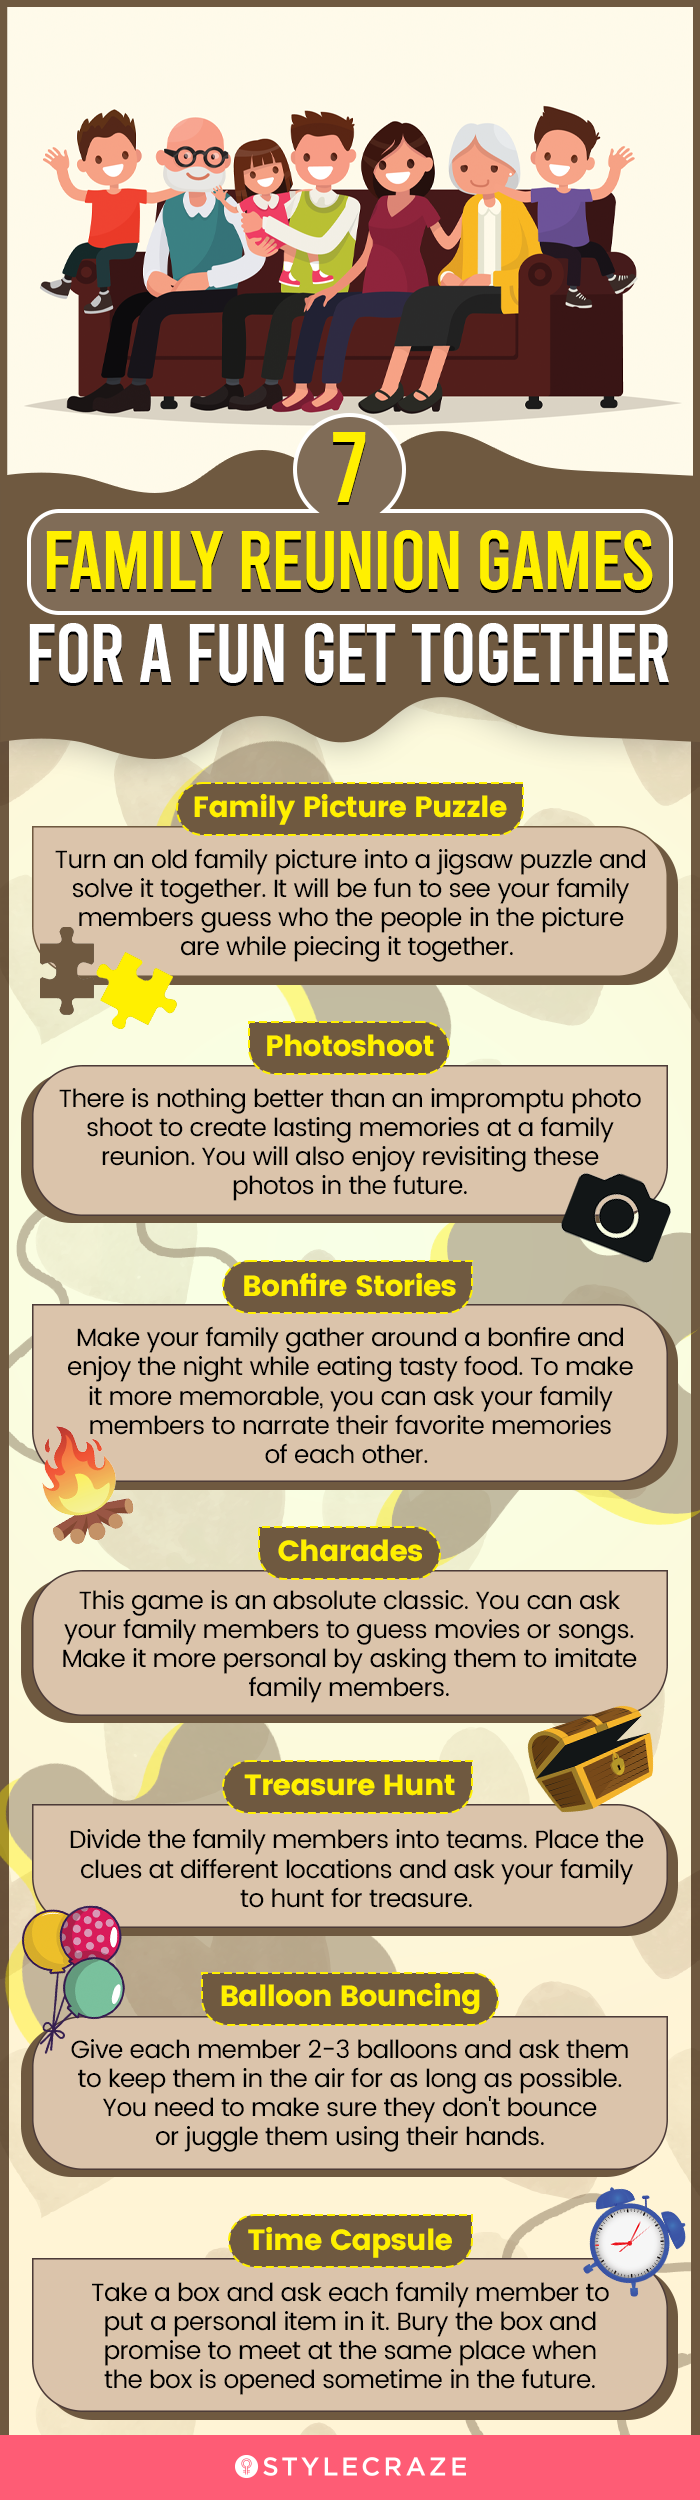 7 family reunion games for a fun get together (infographic)